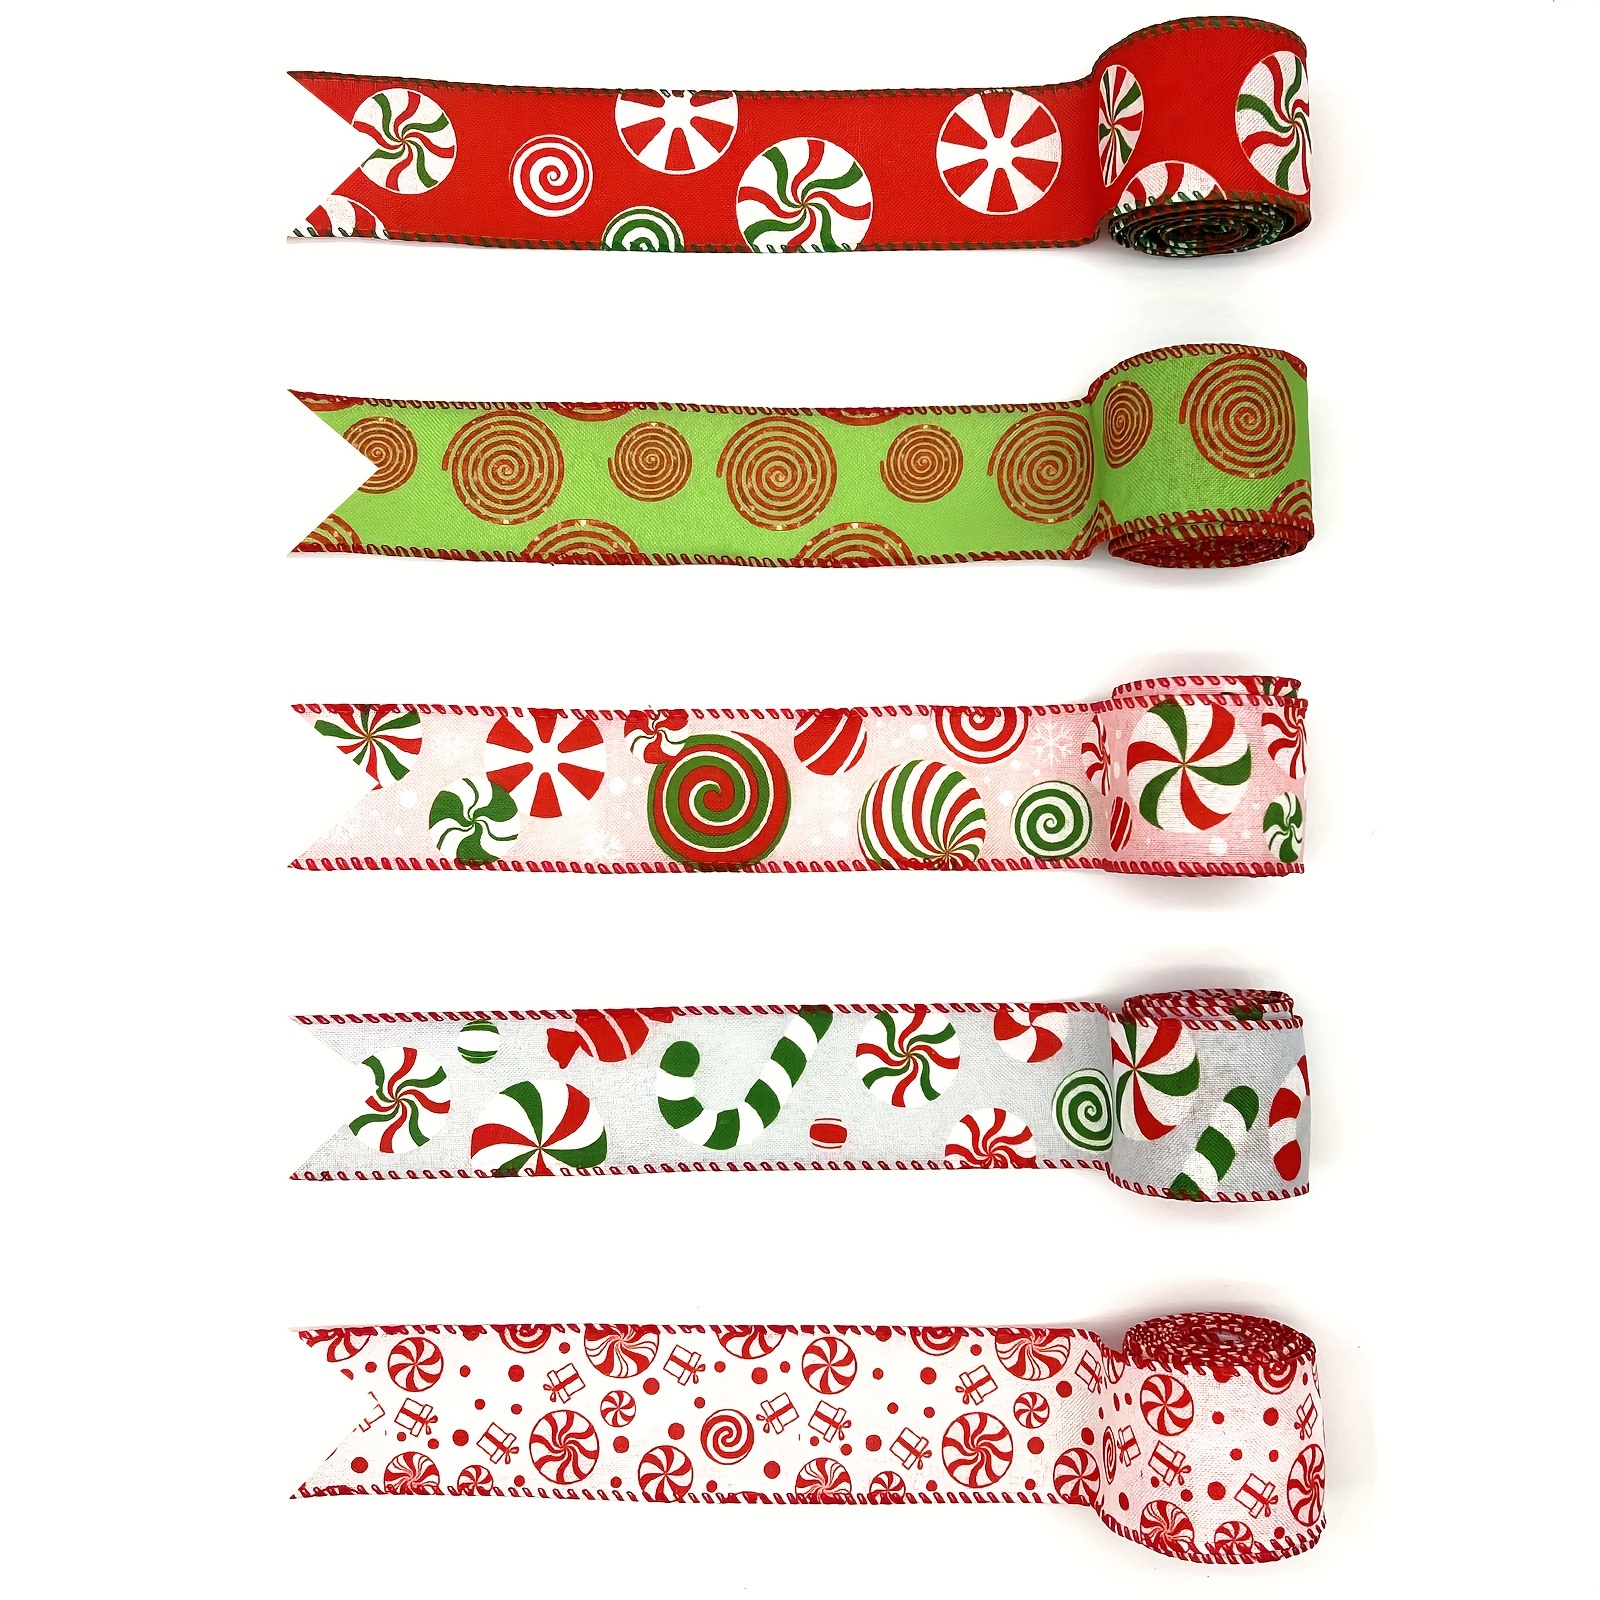 5 Yards Christmas Ribbon Wired Ribbons, Burlap Christmas Ribbon For Wreaths  Bows Diy Crafts Wired Christmas Gift Ribbon For Christmas Home Decor Gift  Wrapping, Ribbons For Bouquets, Flower Wrapping Paper, Craft Supplies